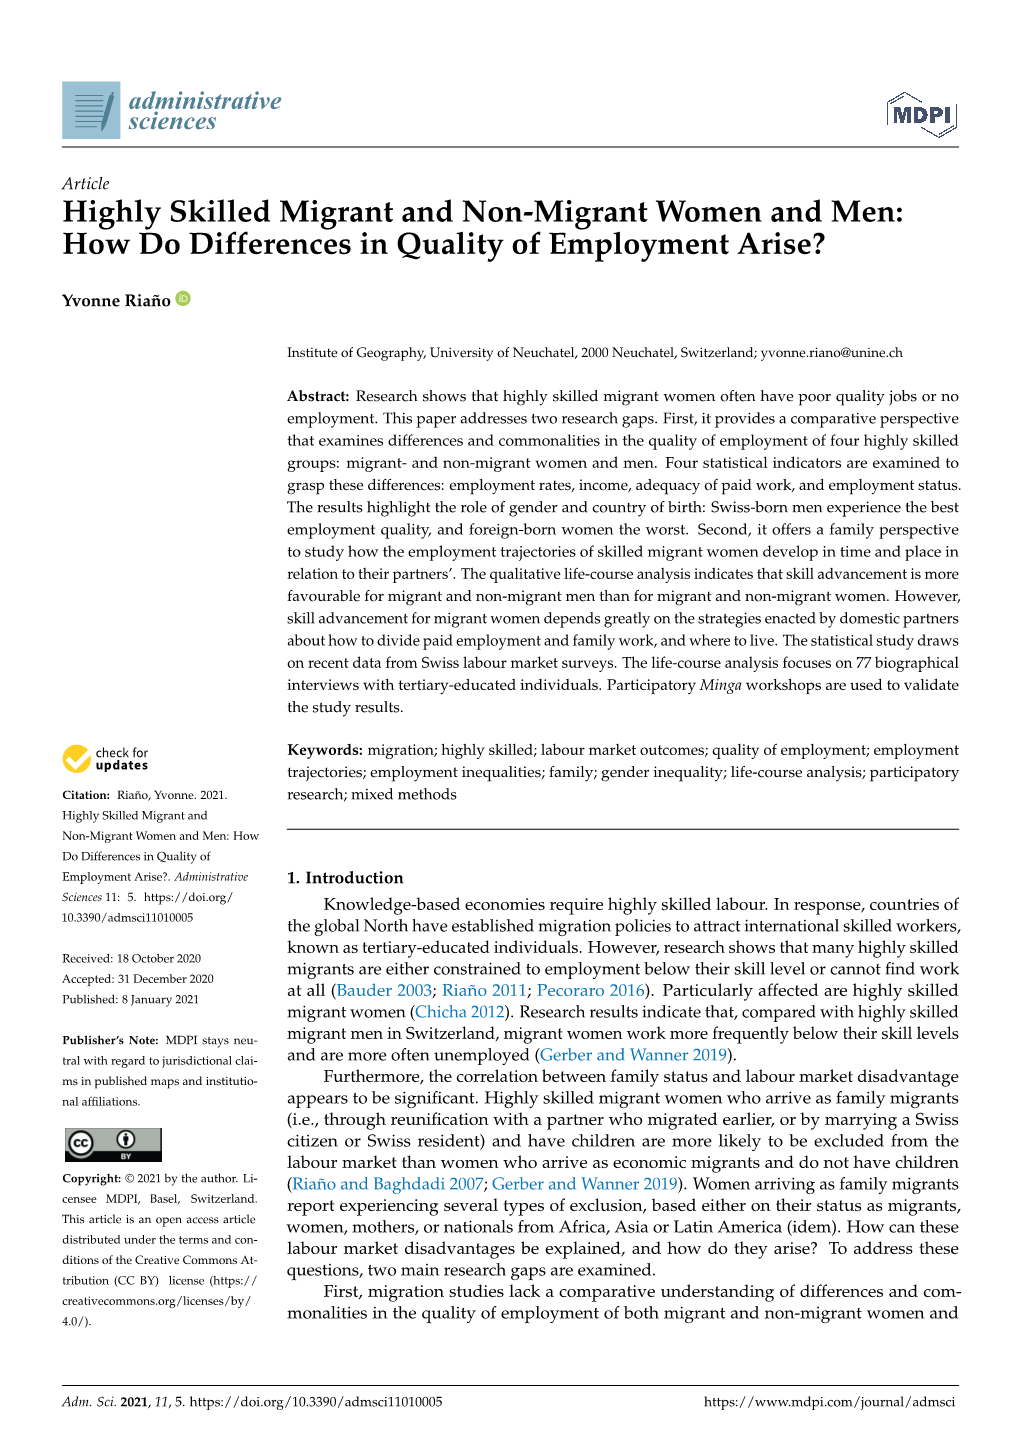 Highly Skilled Migrant and Non-Migrant Women and Men: How Do Differences in Quality of Employment Arise?